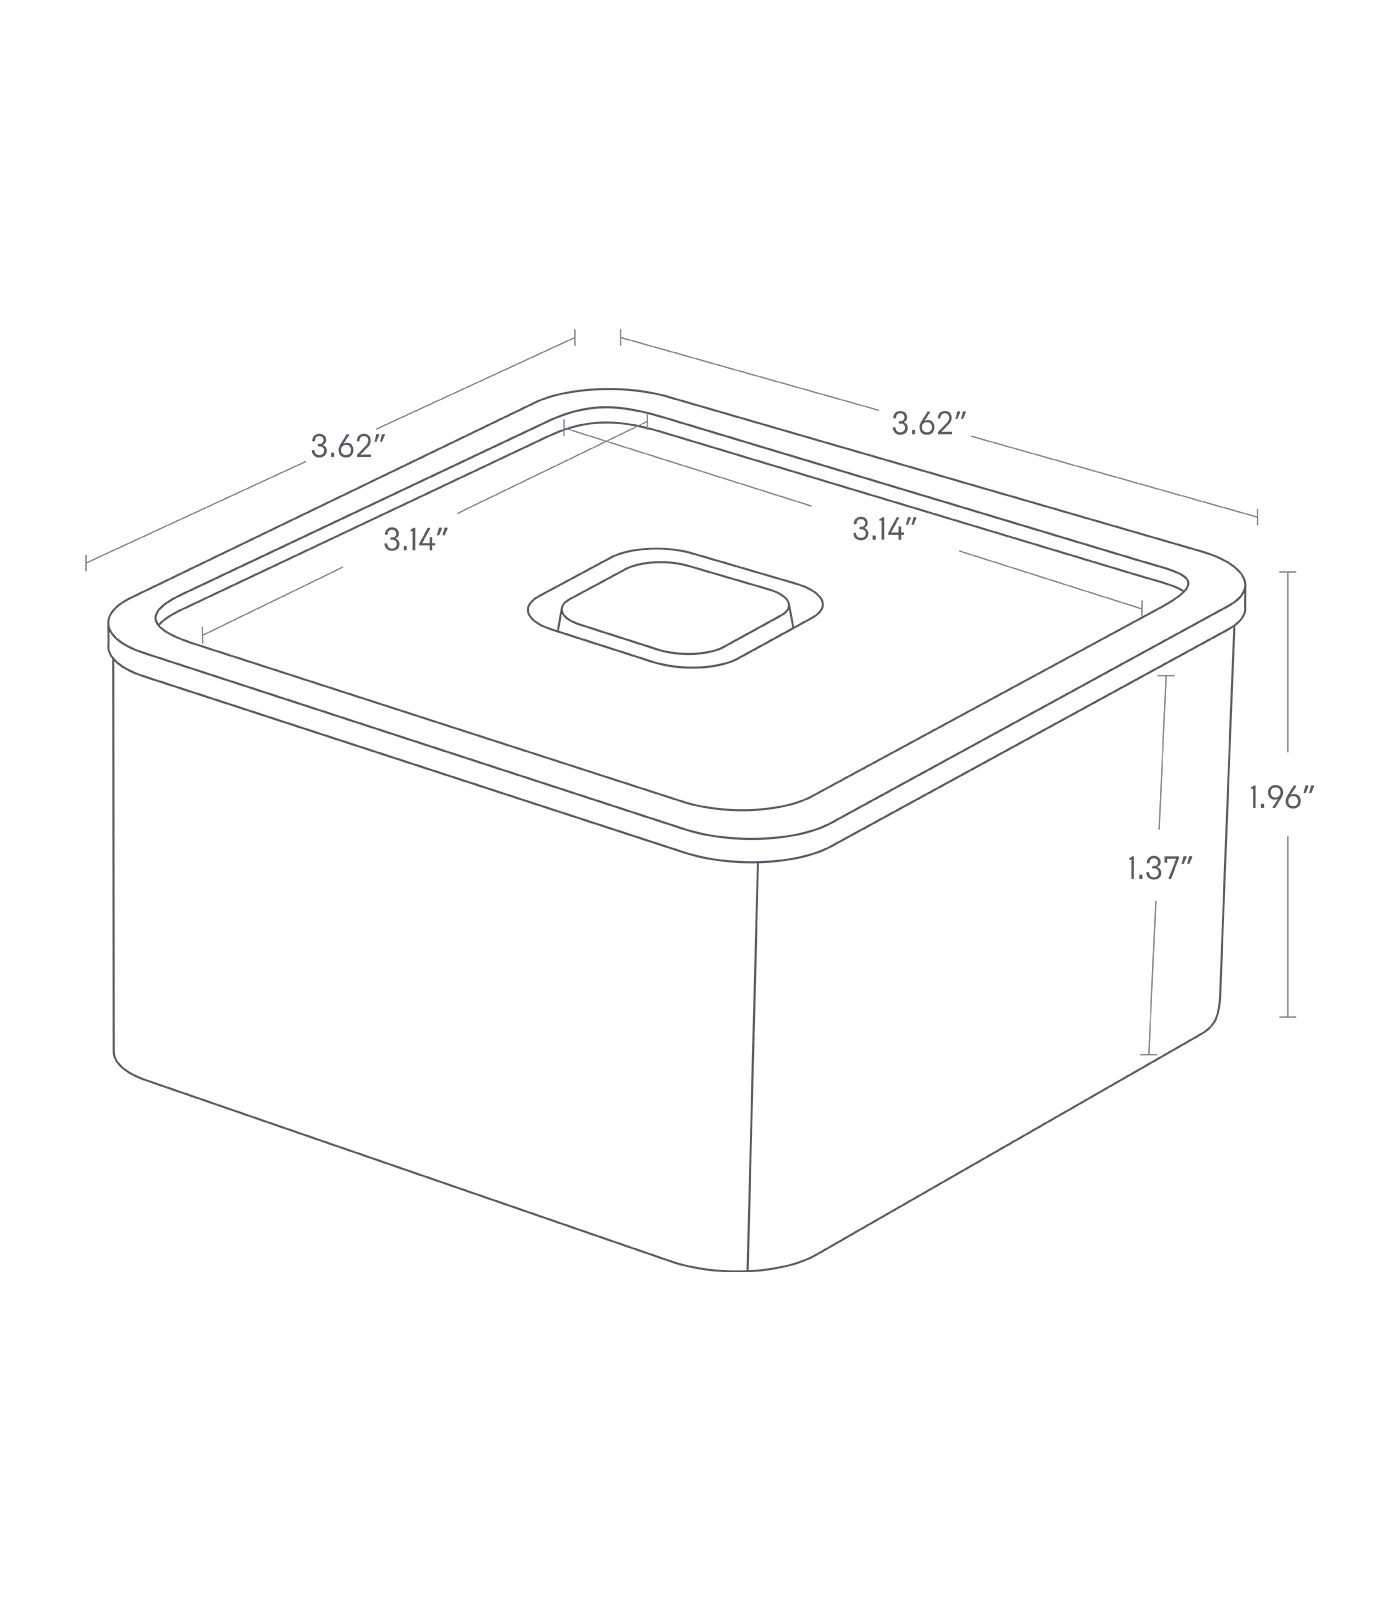 Dimension image for Vacuum-Sealing Bento Box - Square showing a total length/width of 3.62